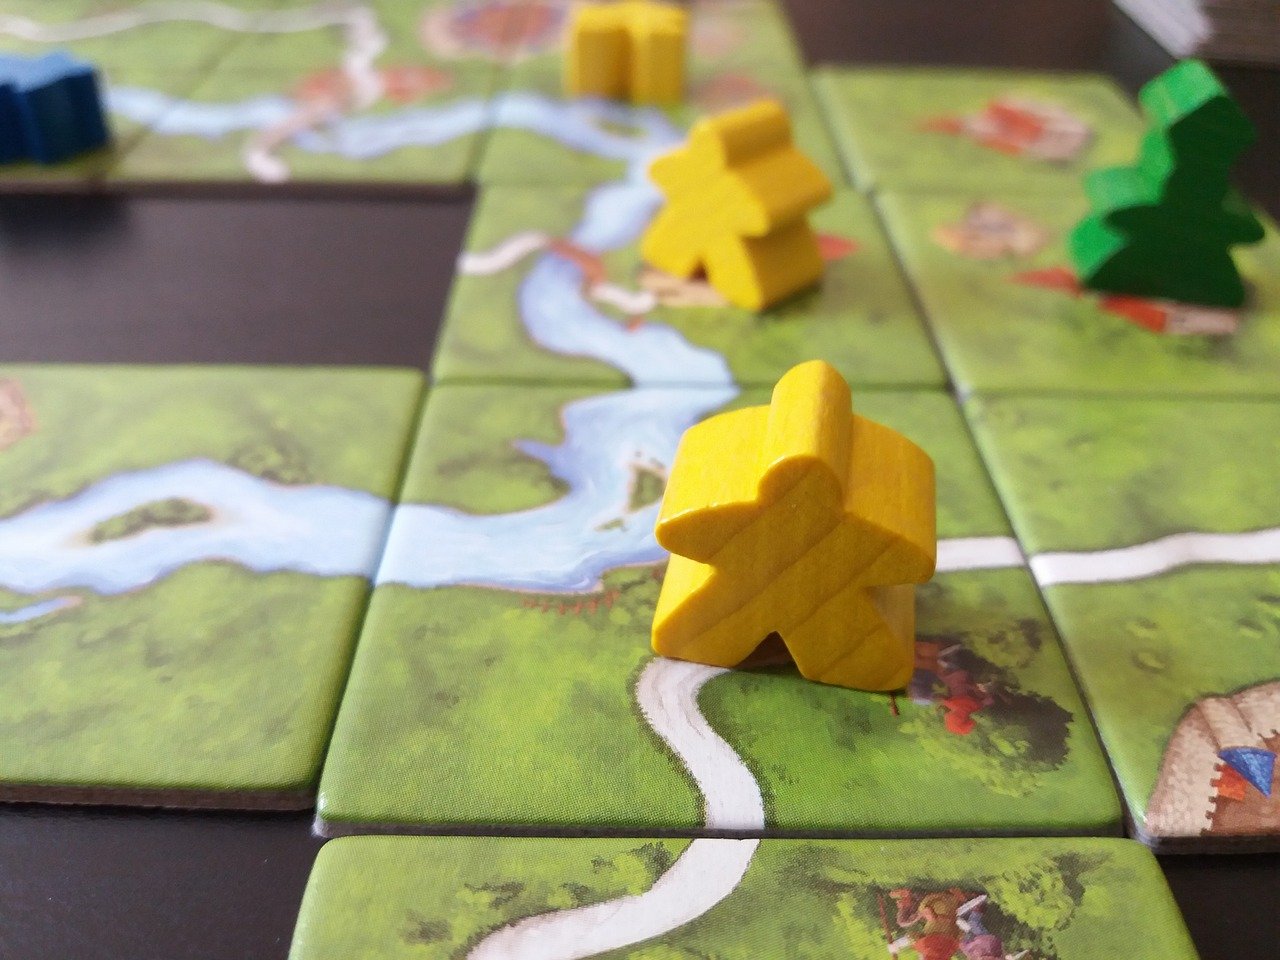 A guide to Carcassonne strategy: The basics